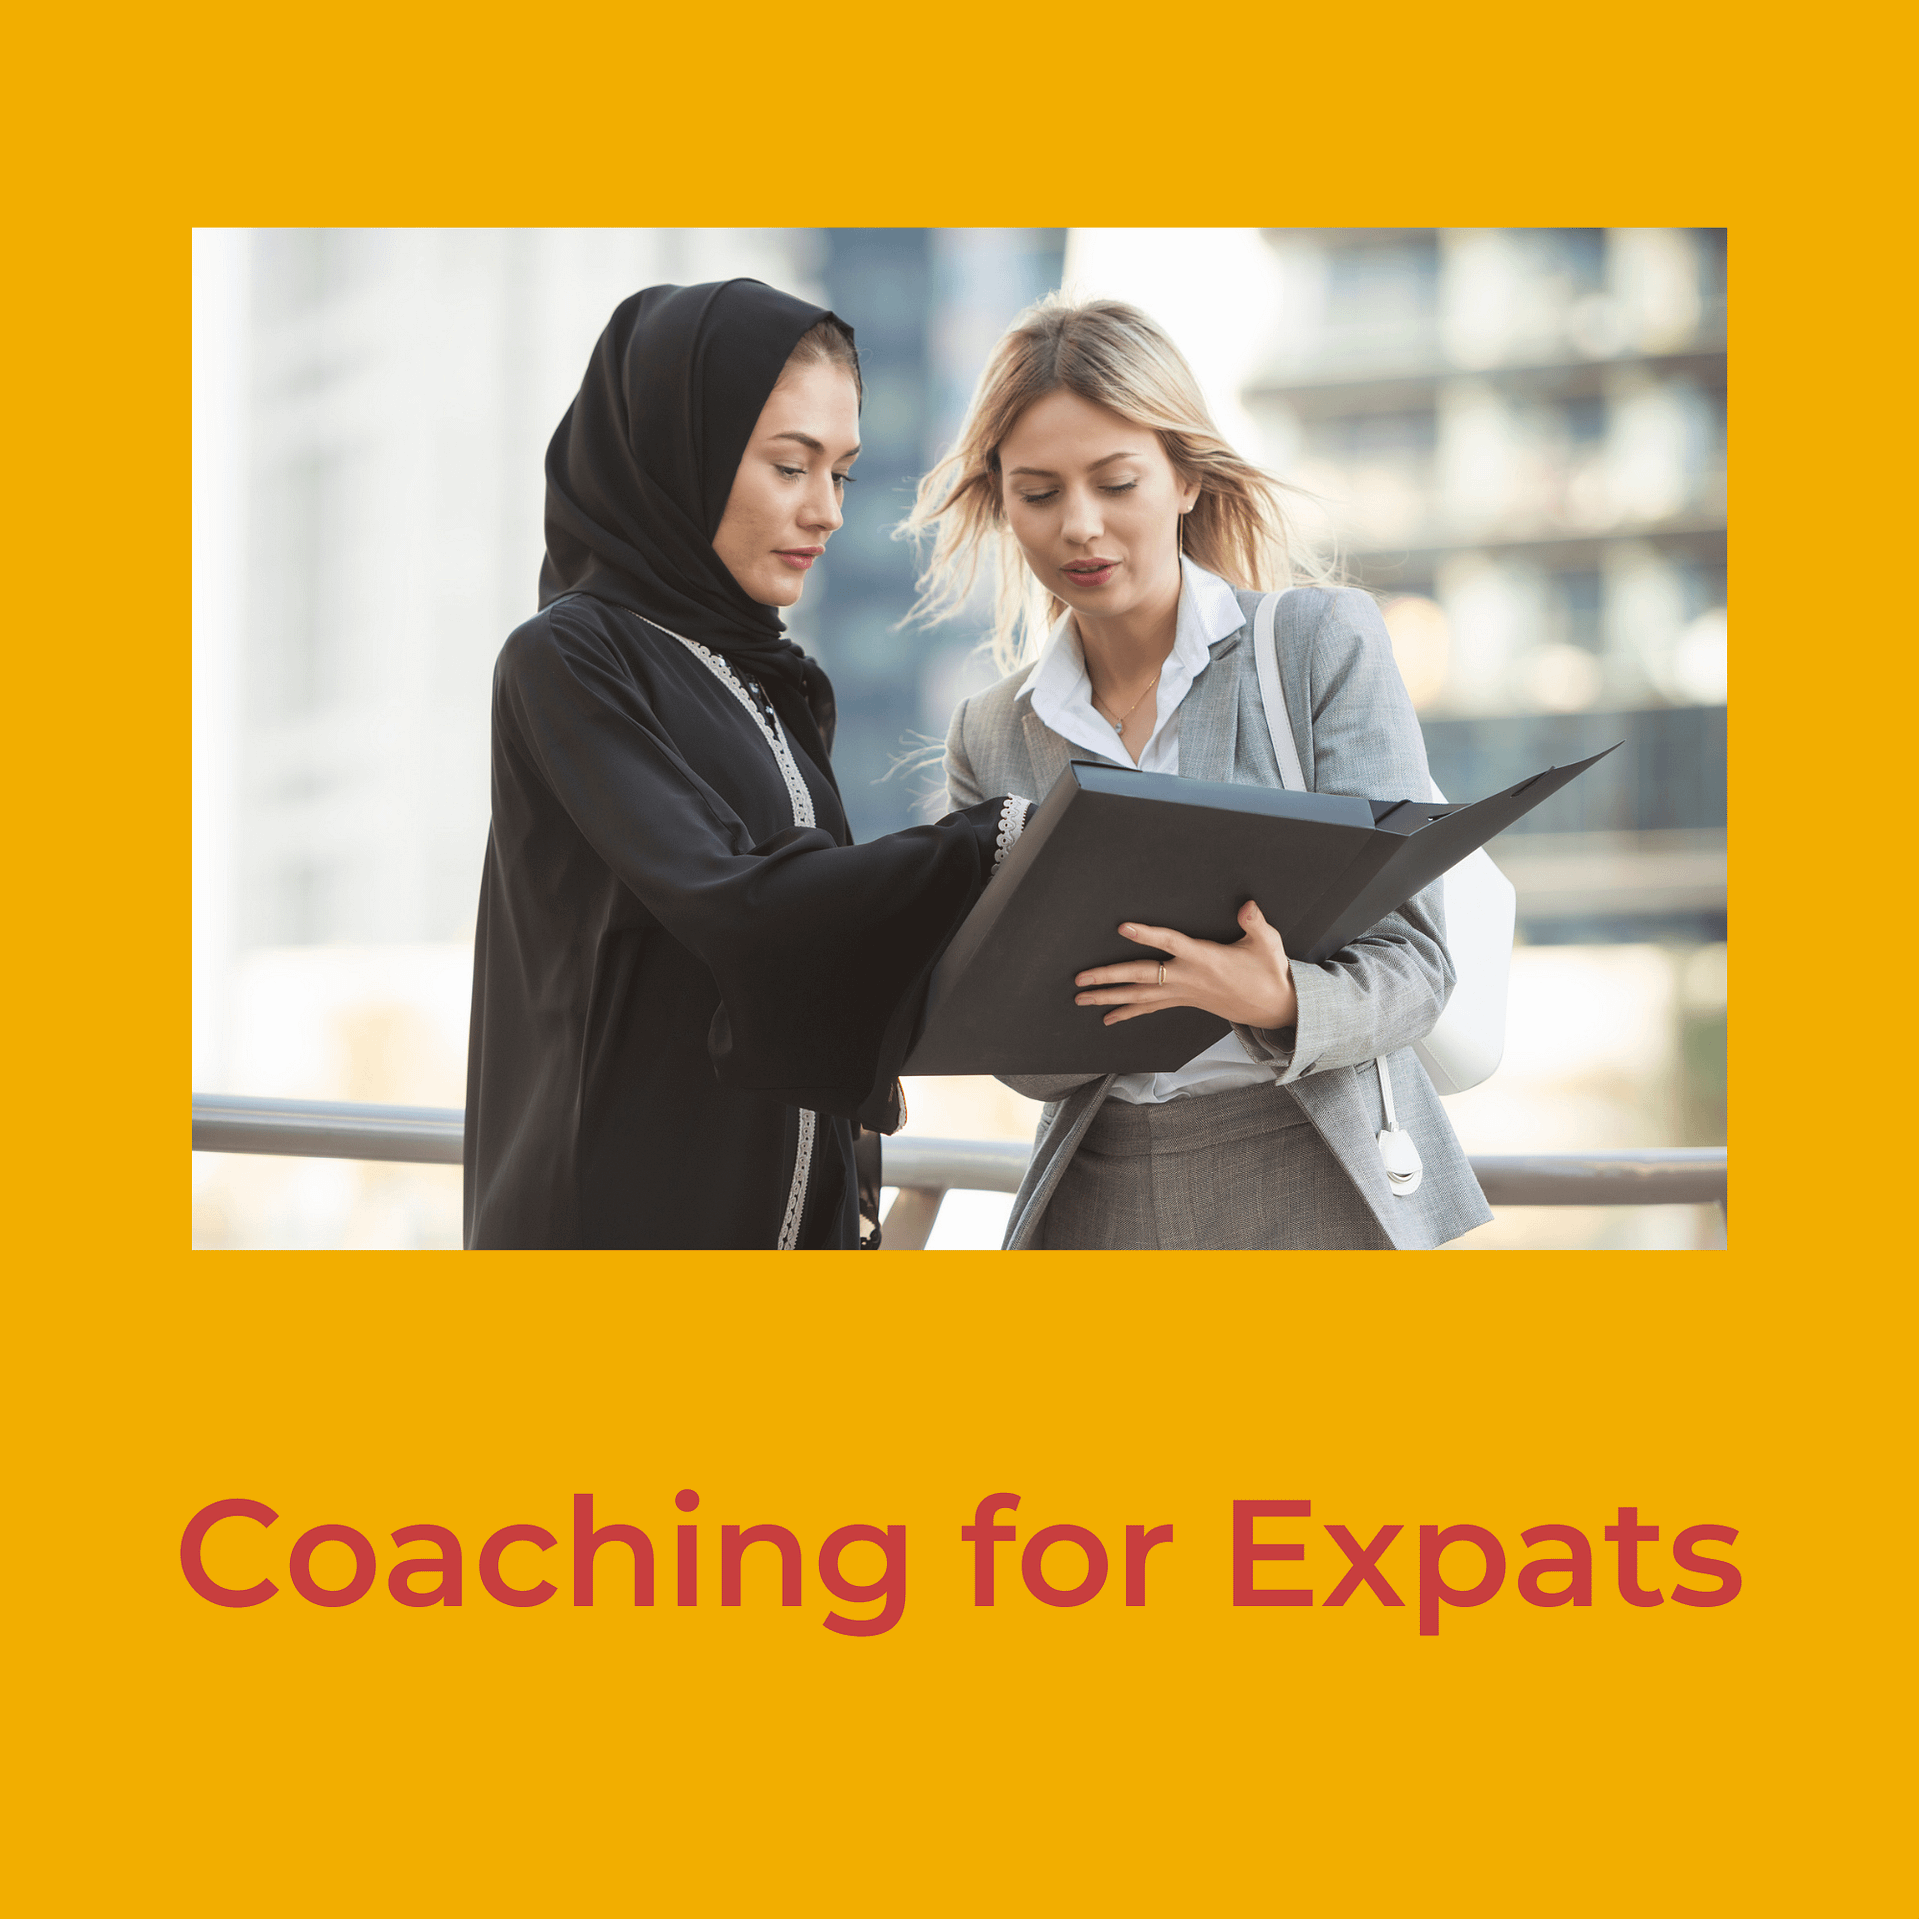 Coaching for Expats